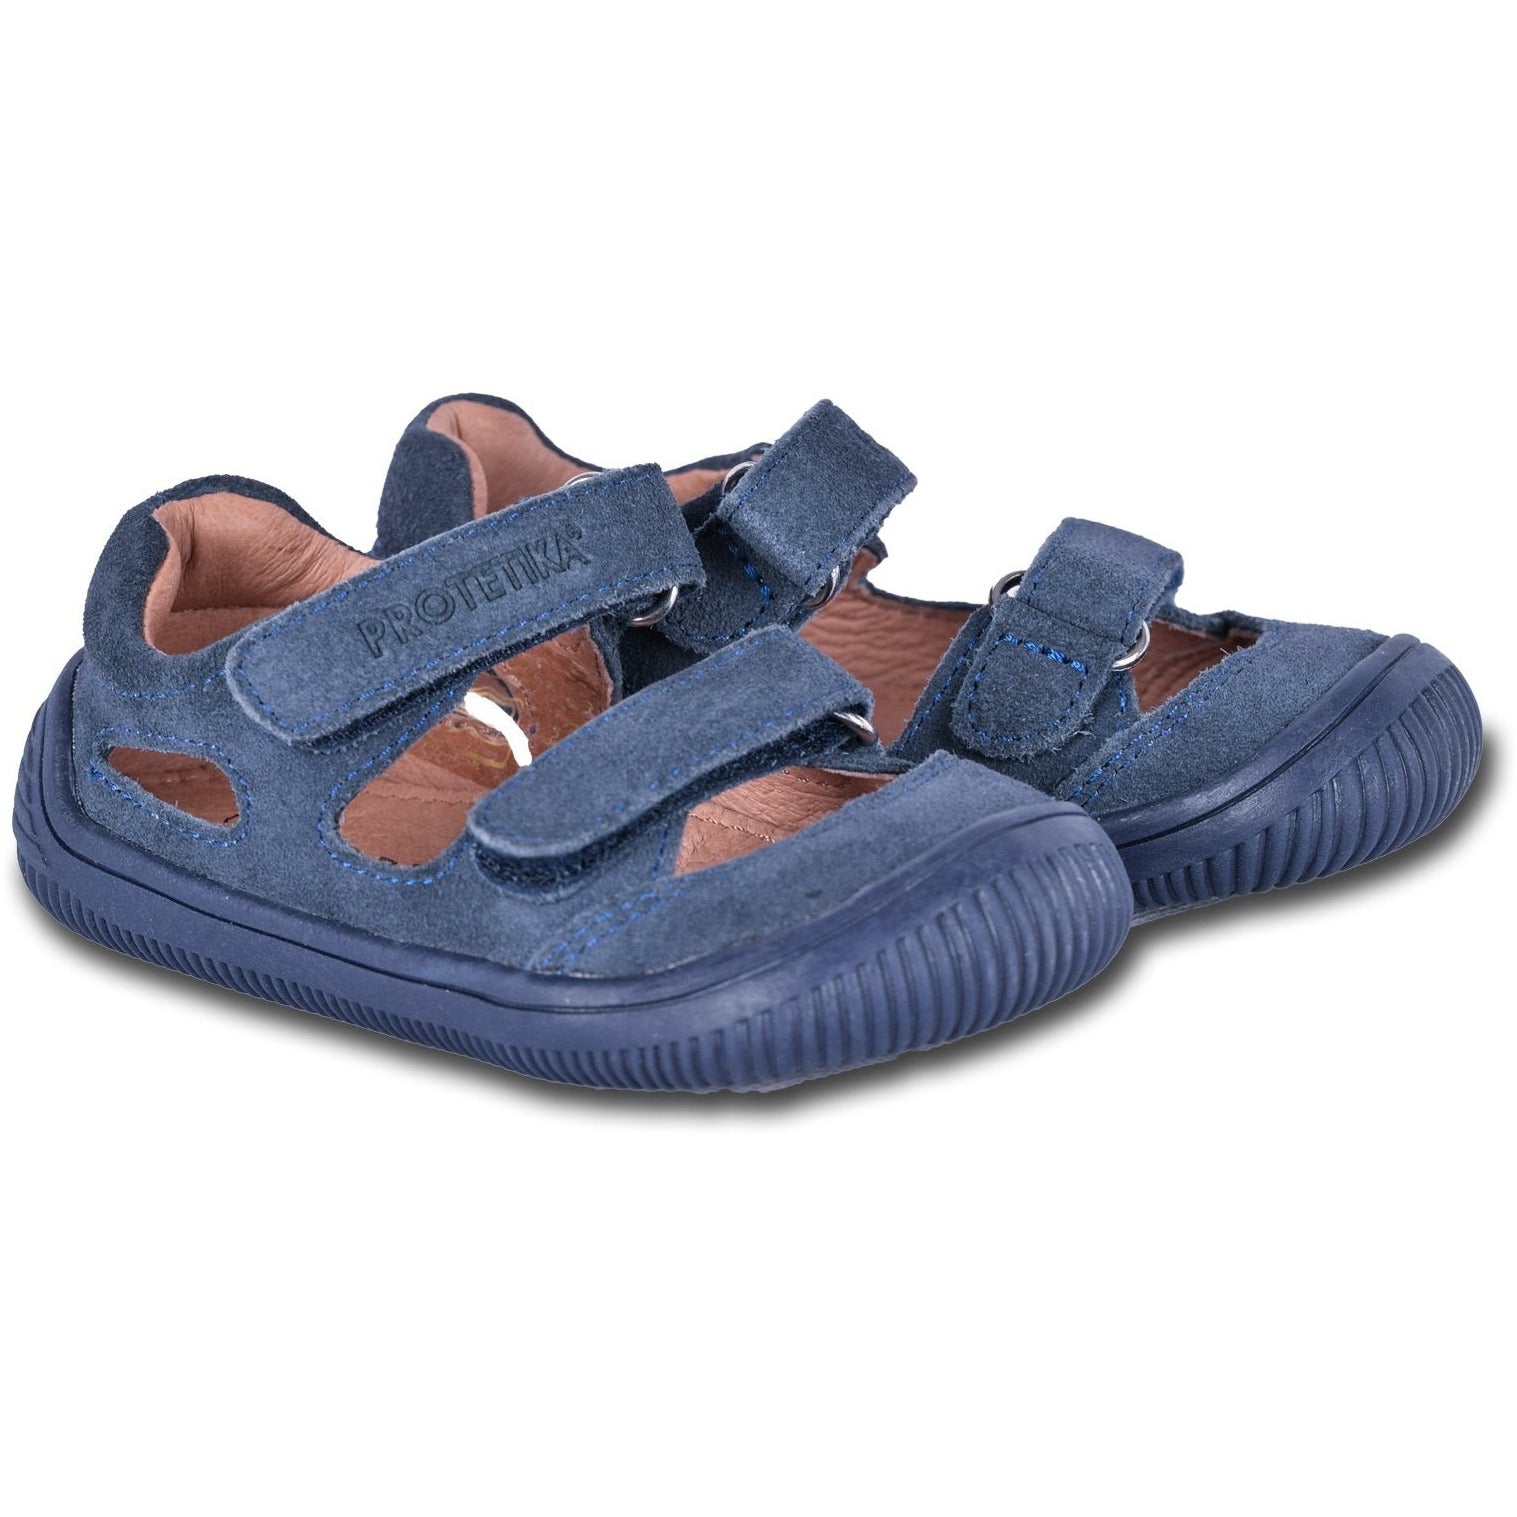 Protetika brand flexible, thin and flat sole minimalist barefoot shoes for first walkers.